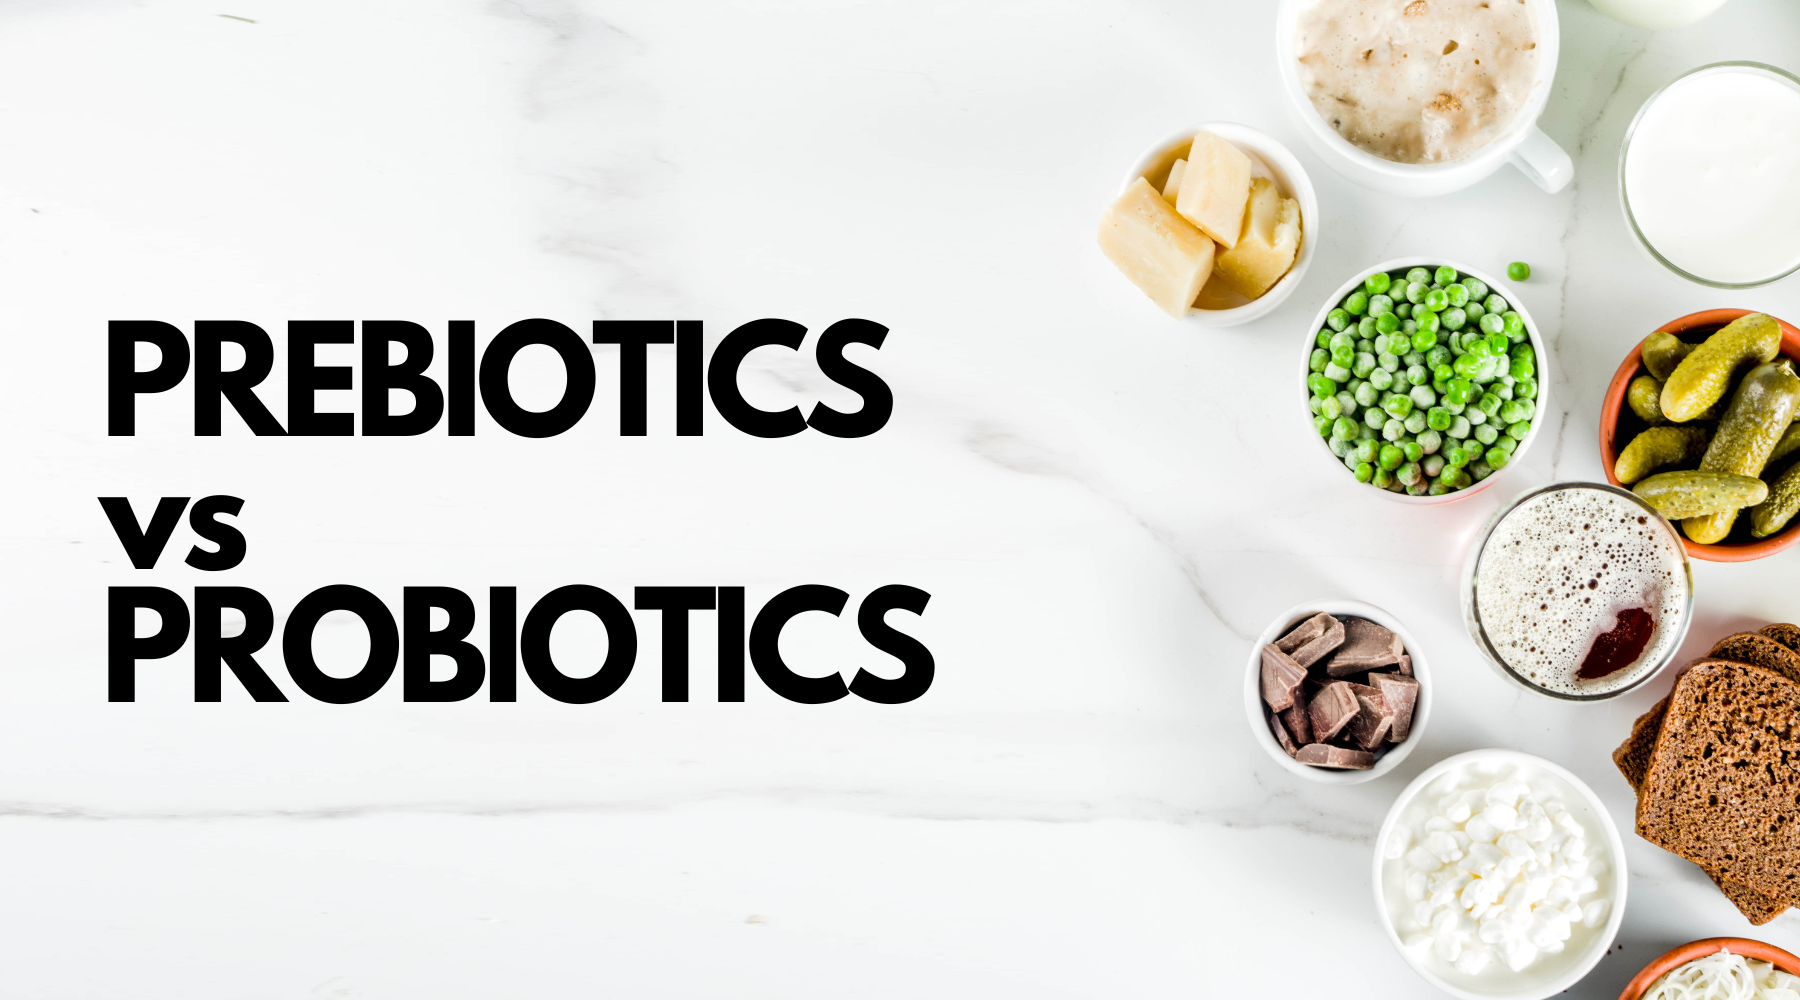 What is the difference between Probiotics and Prebiotics?